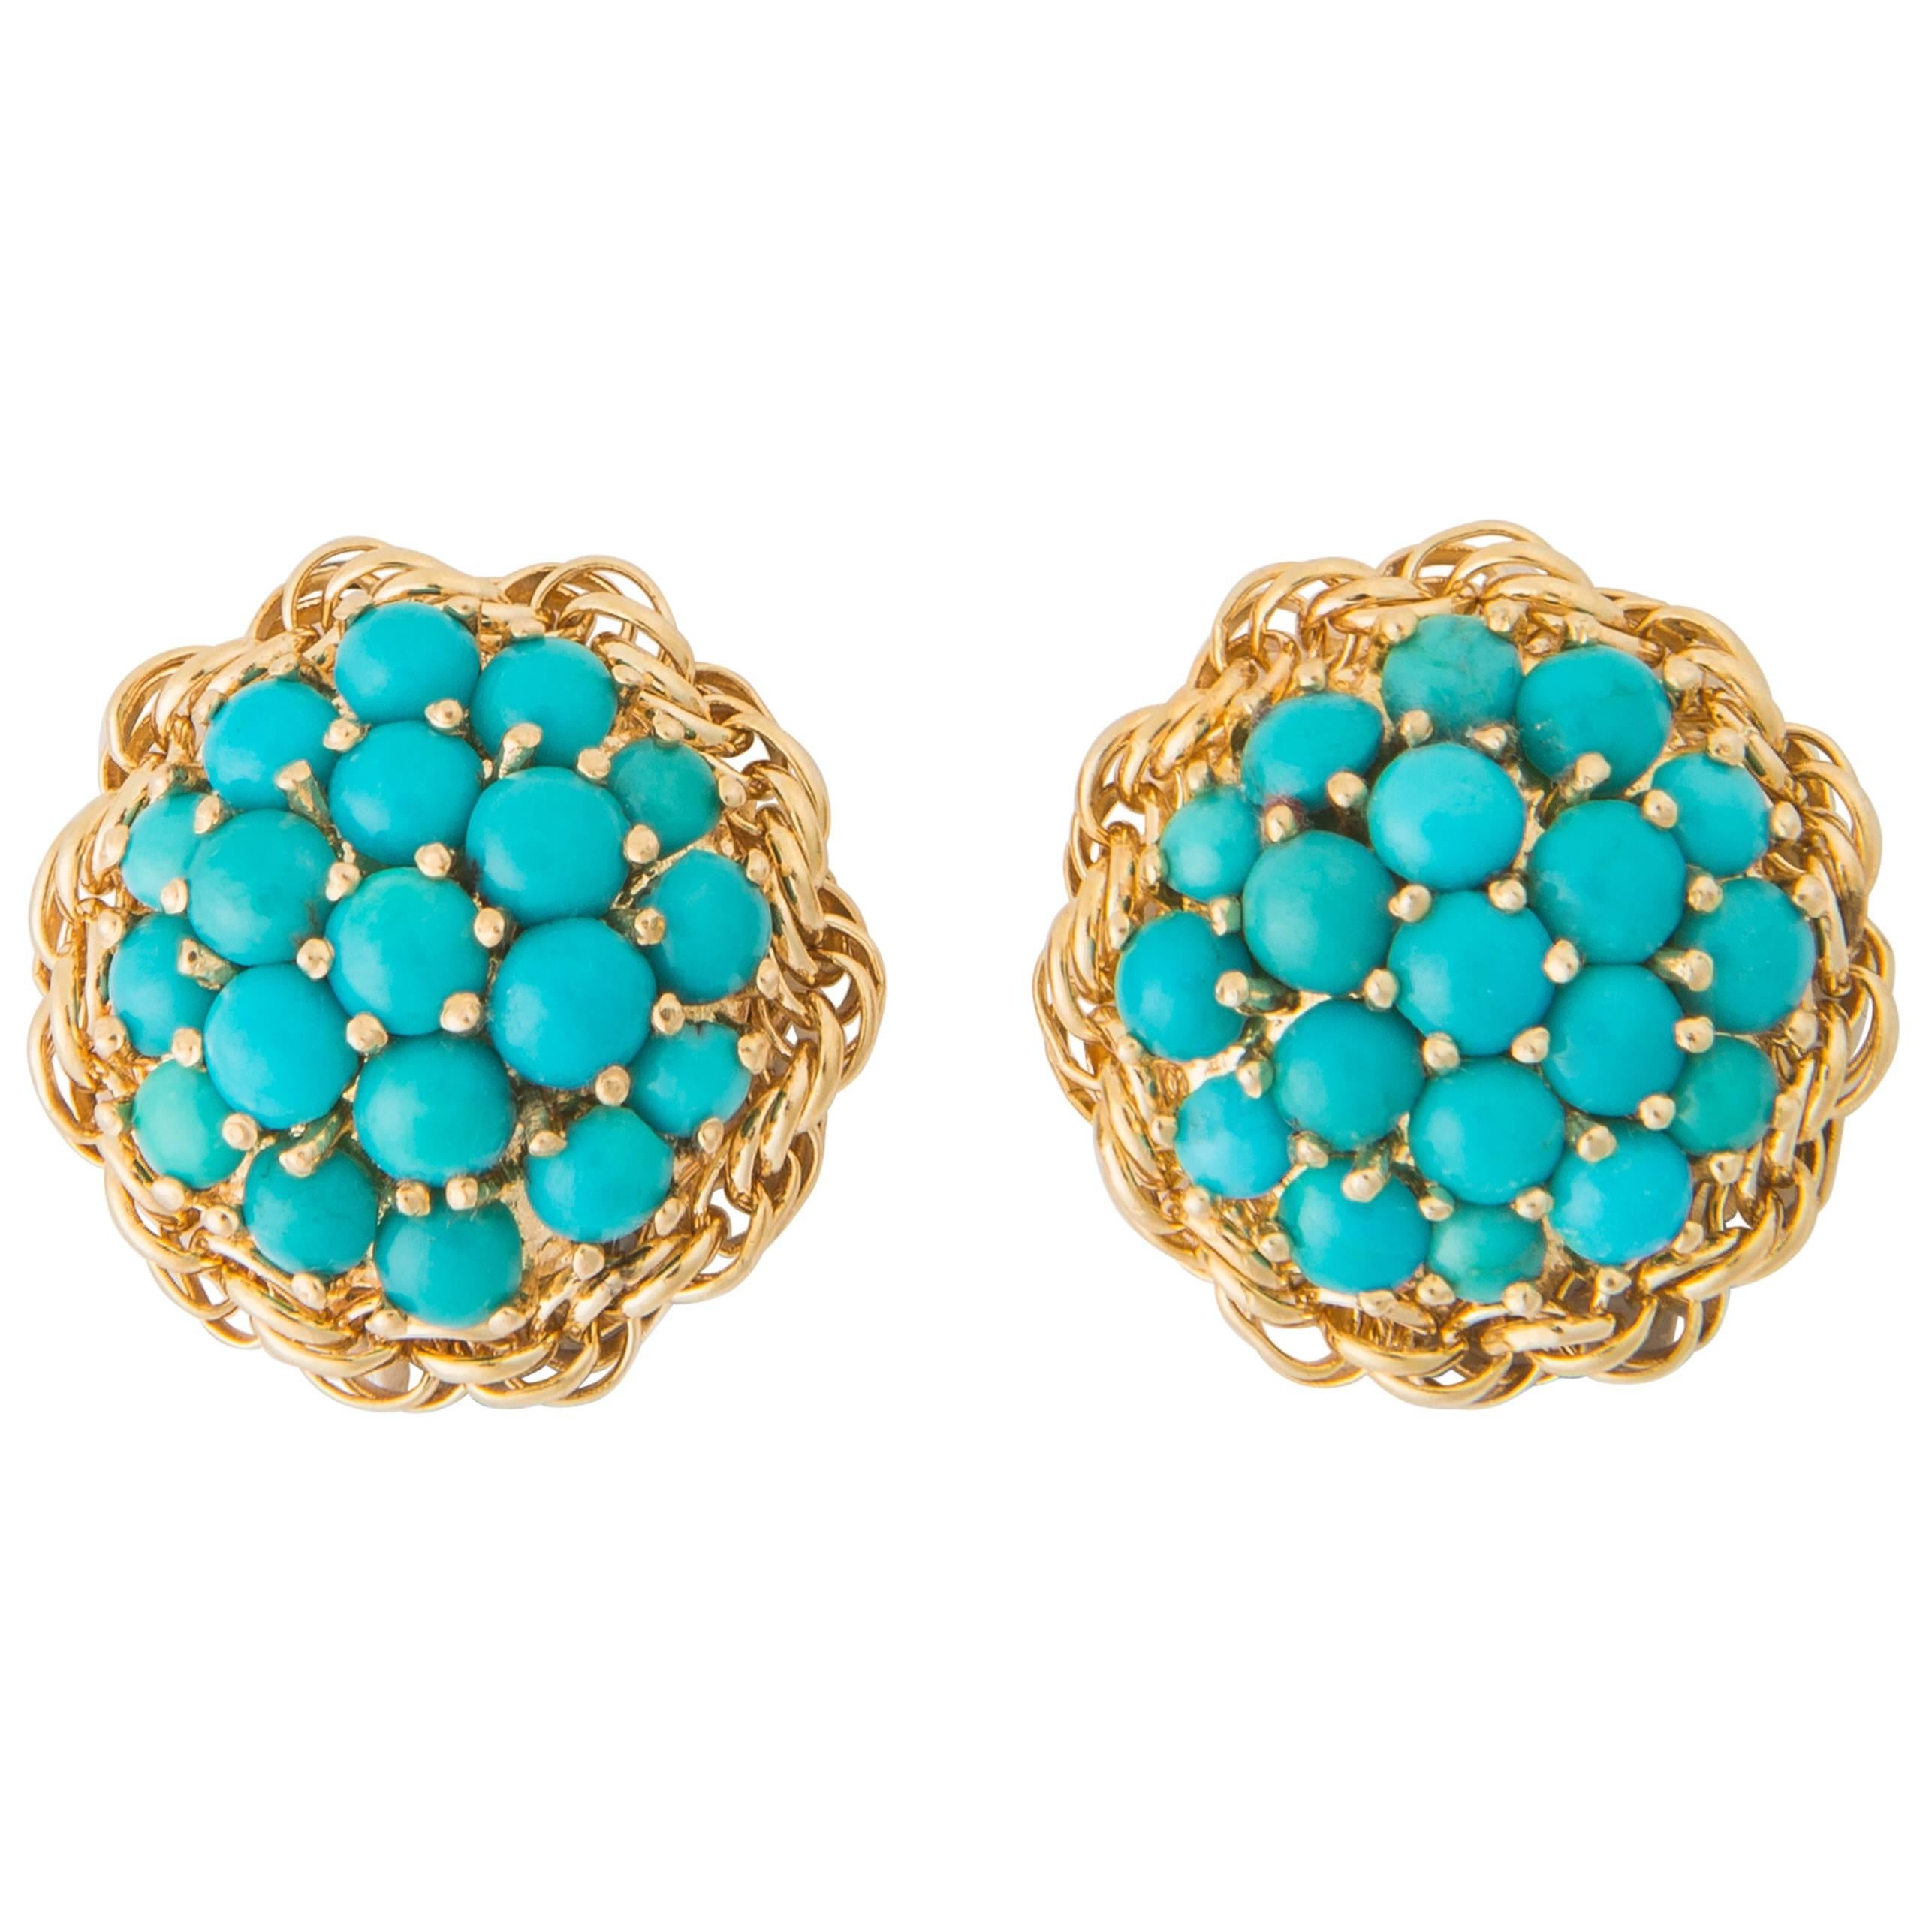 Cartier Turquoise Gold Earrings